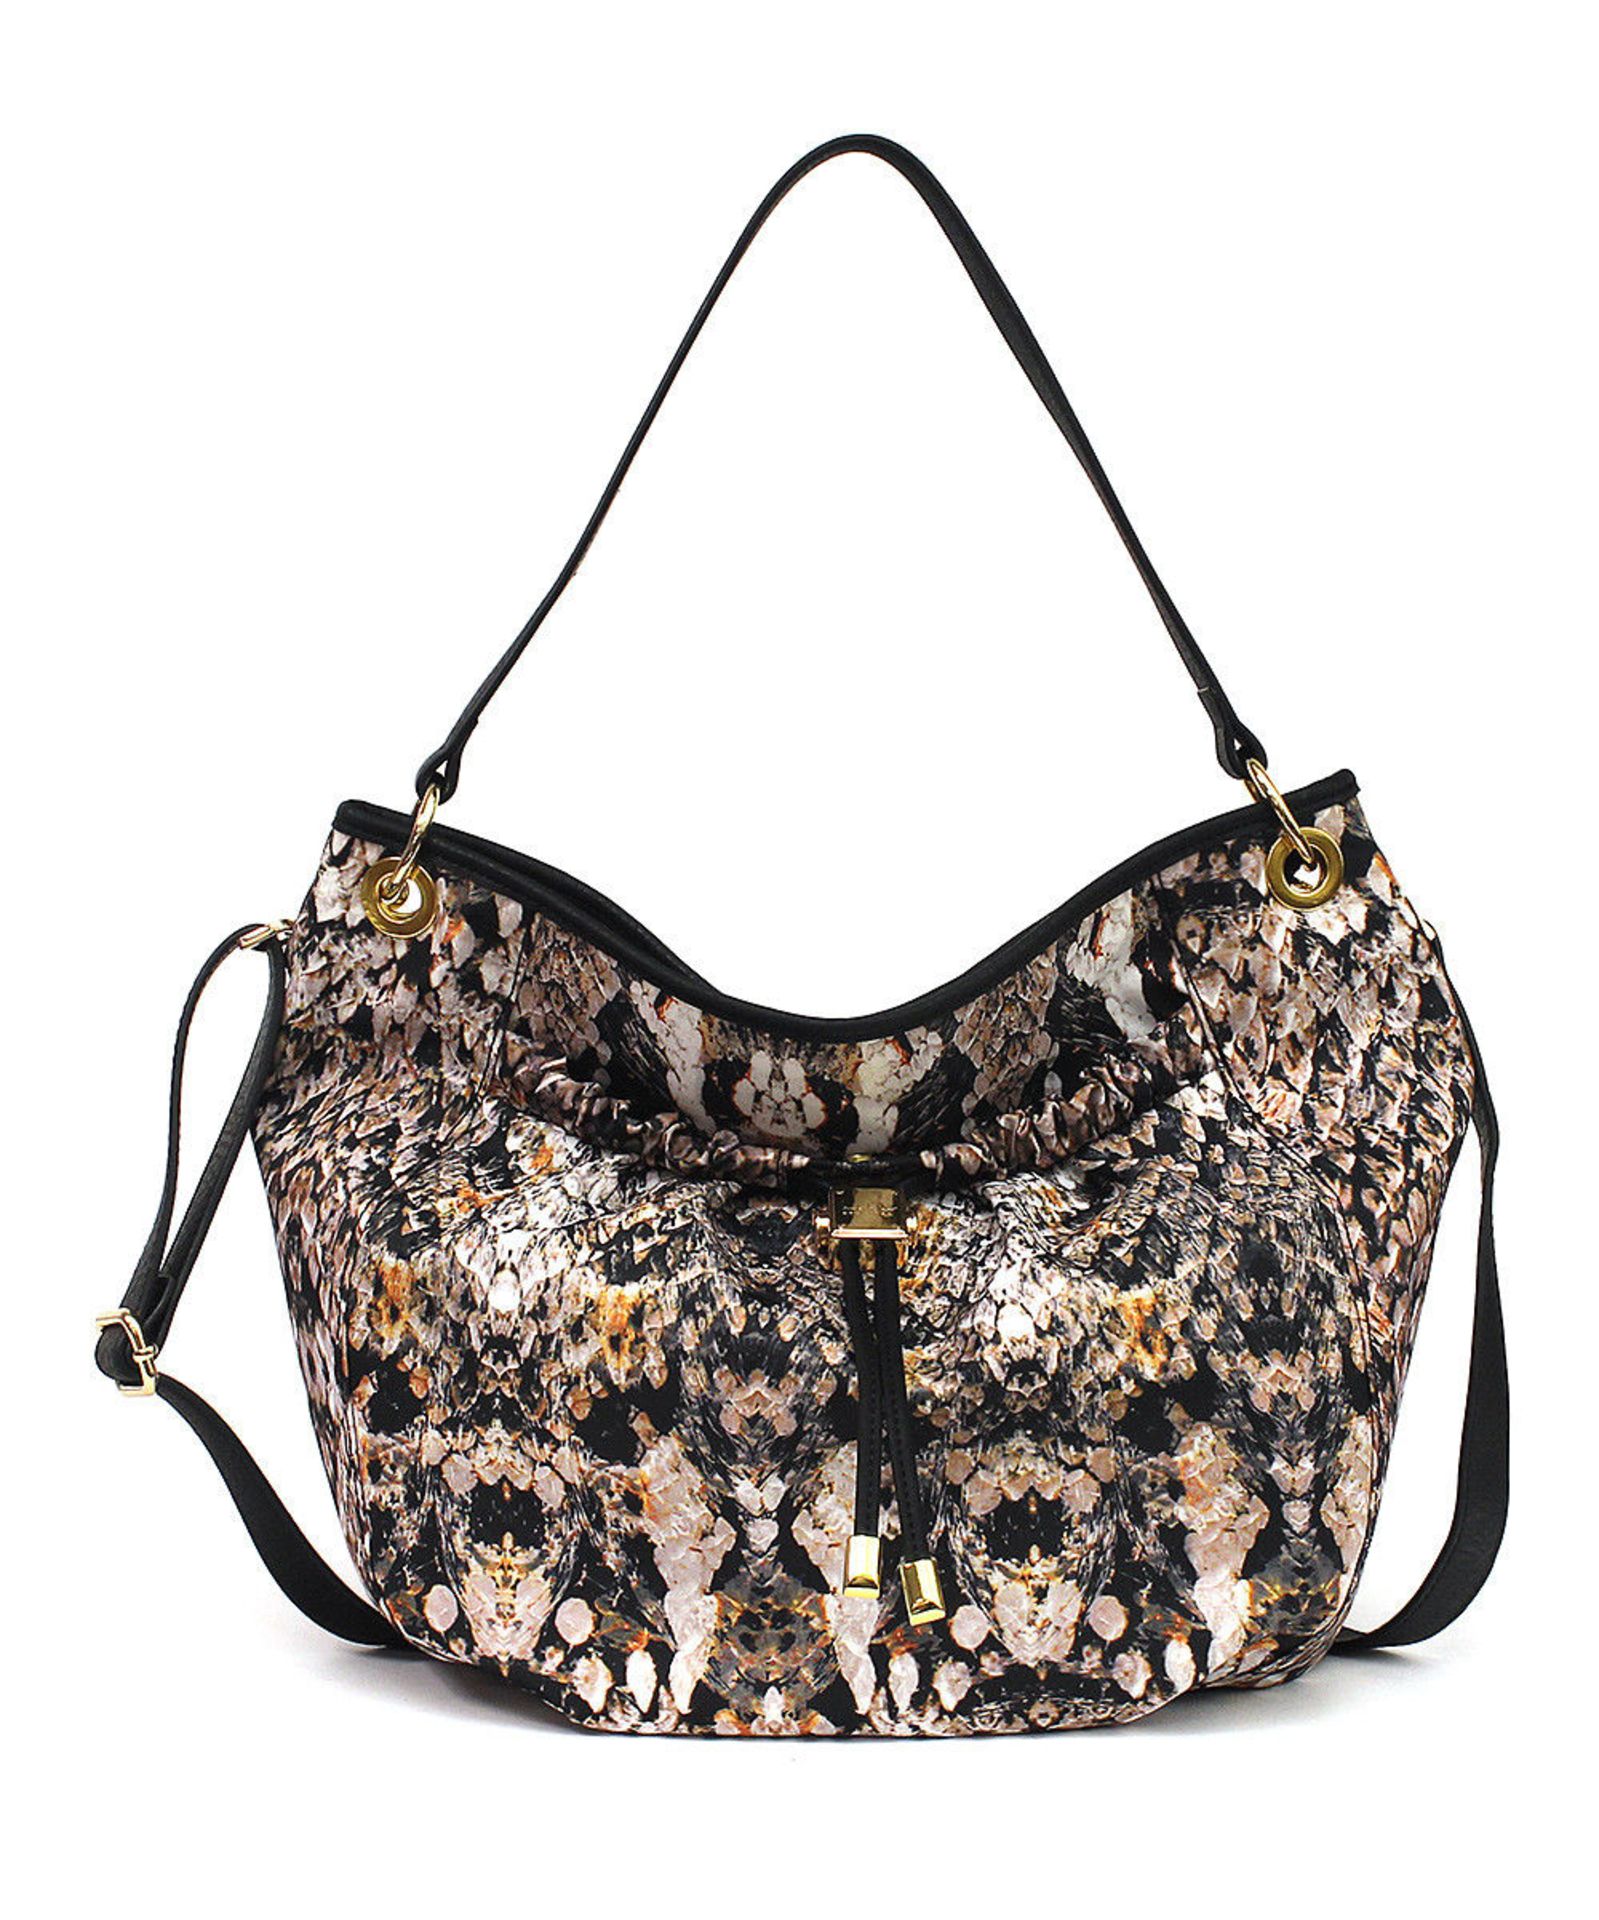 Nicole Miller New York Snake Grand Hobo (New with tags) [Ref: 34851014- S]